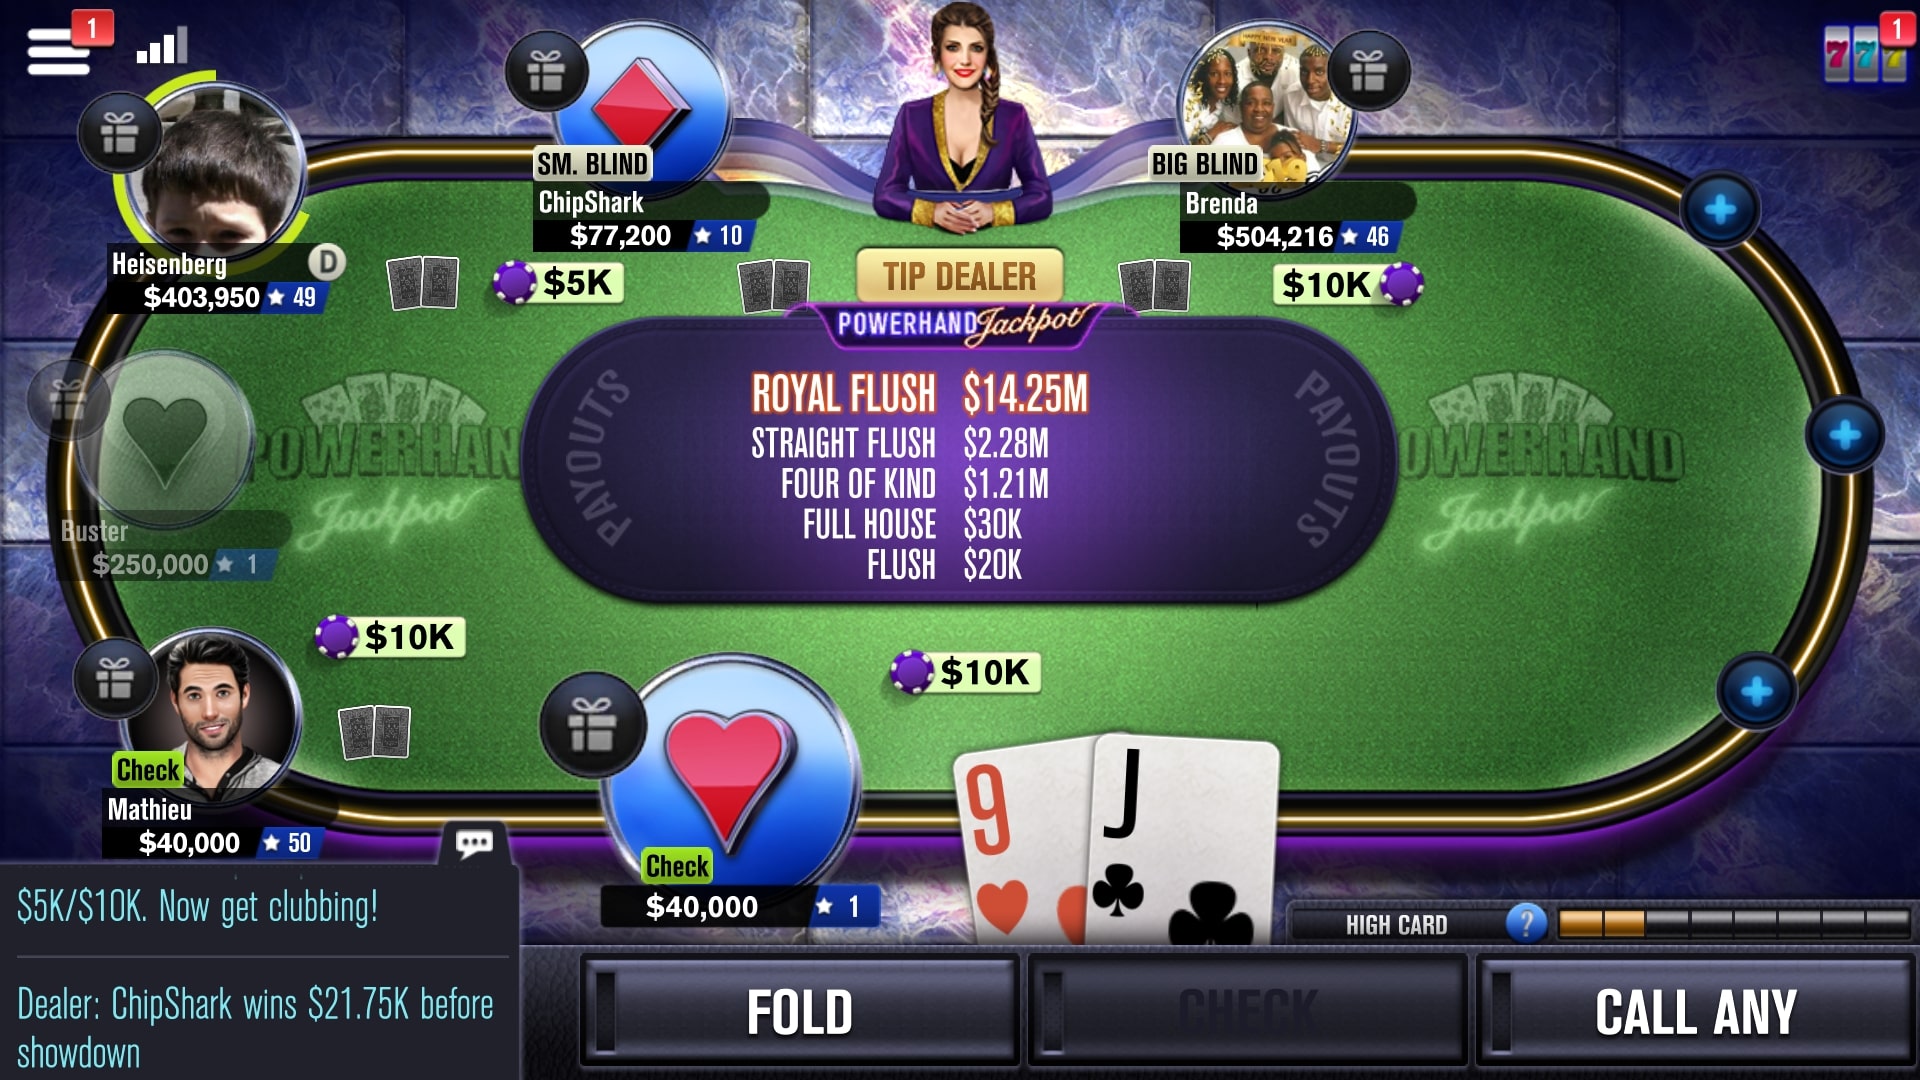 best app for poker with friends